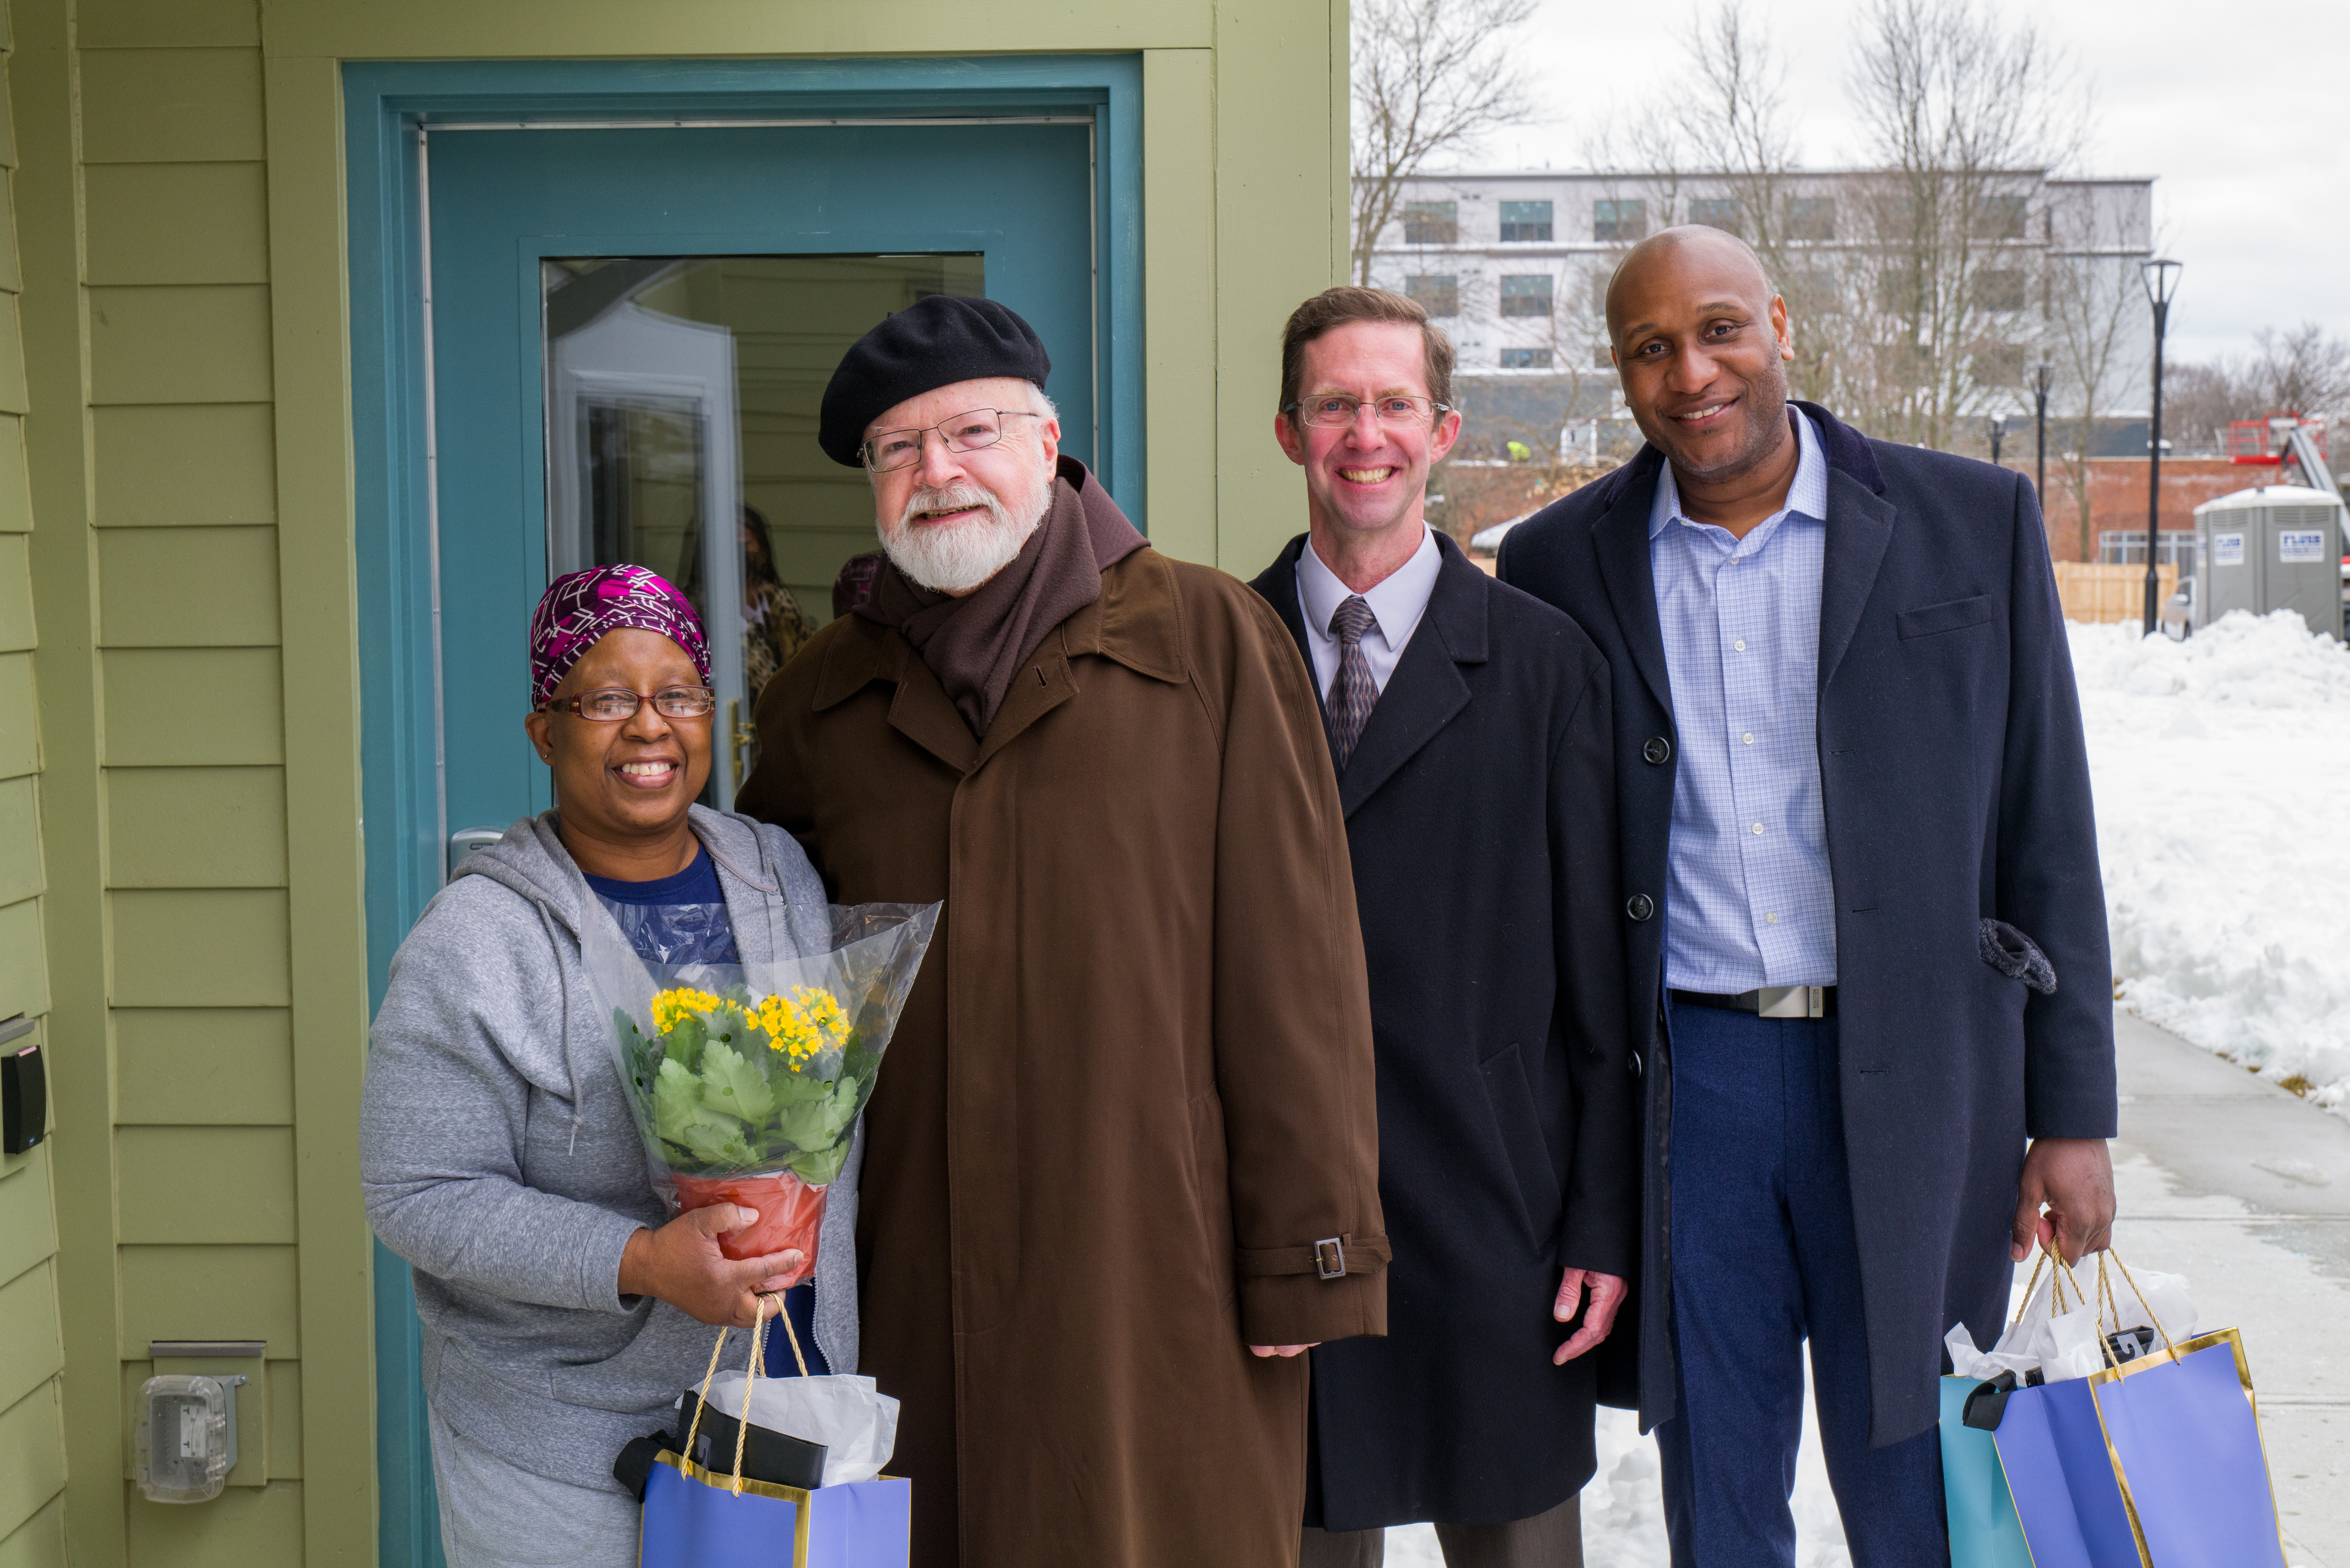 Cardinal Seán O’Malley Helps Welcome Cote Village Townhomes Residents